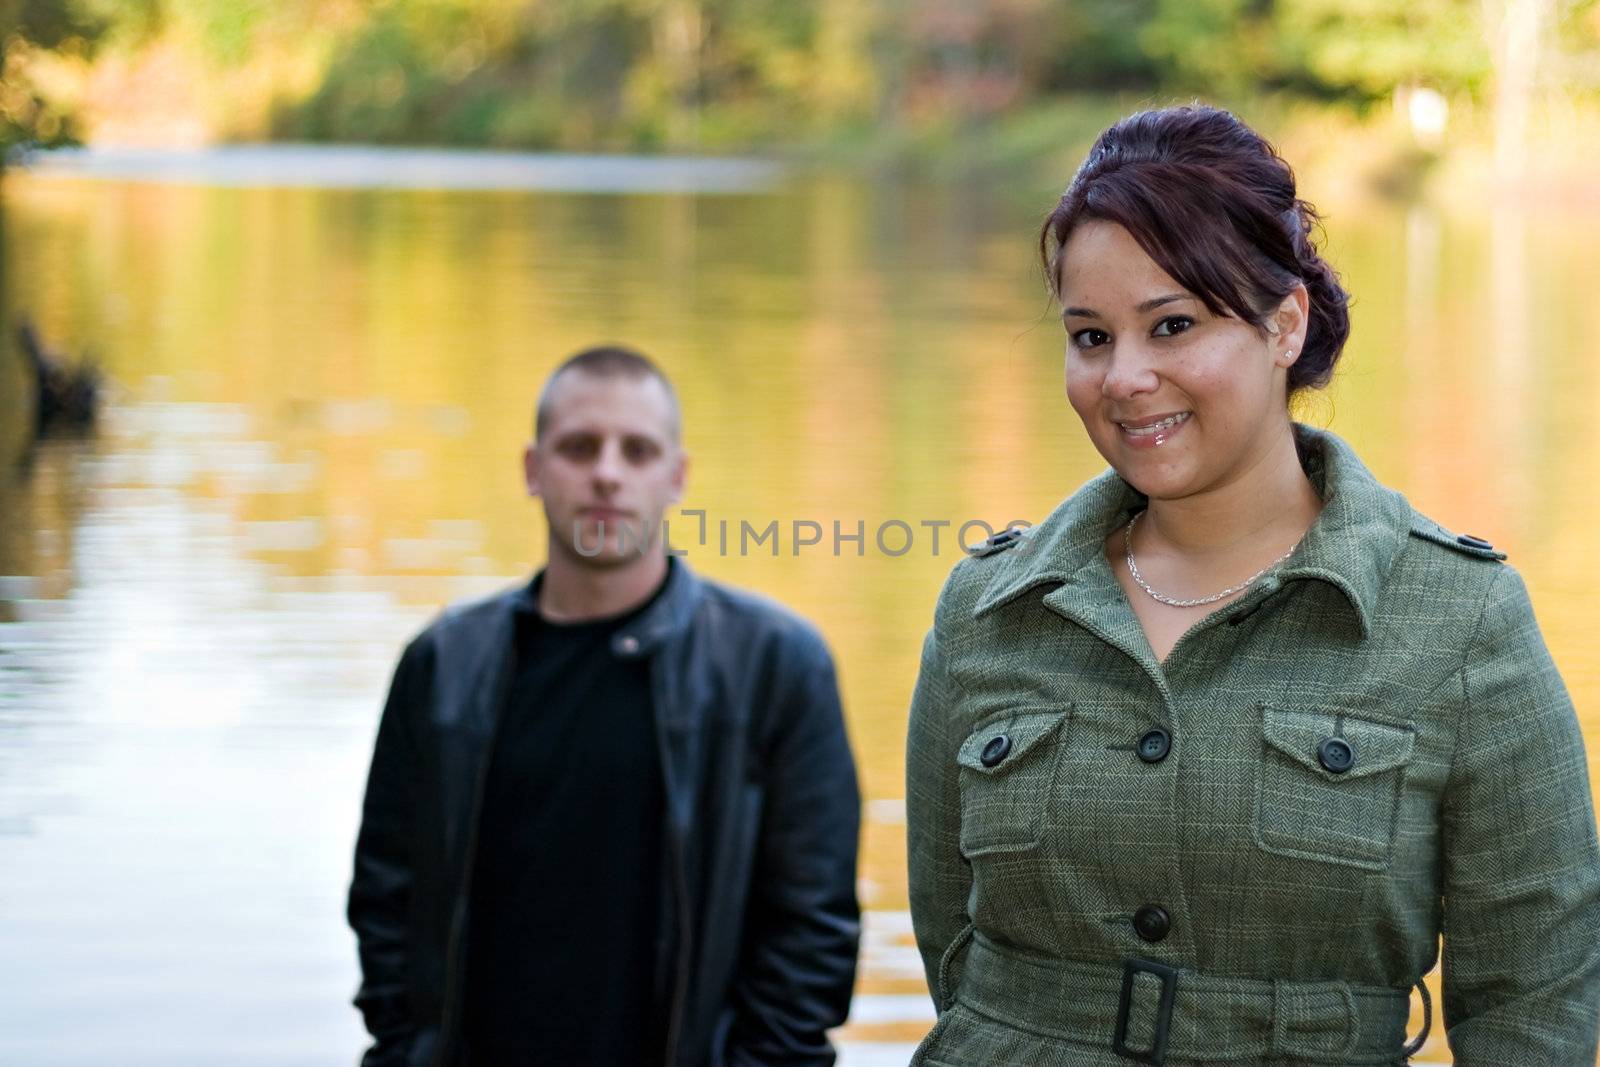 A young happy couple standing by a lake in autumn.  Shallow depth of field with focus on the woman.